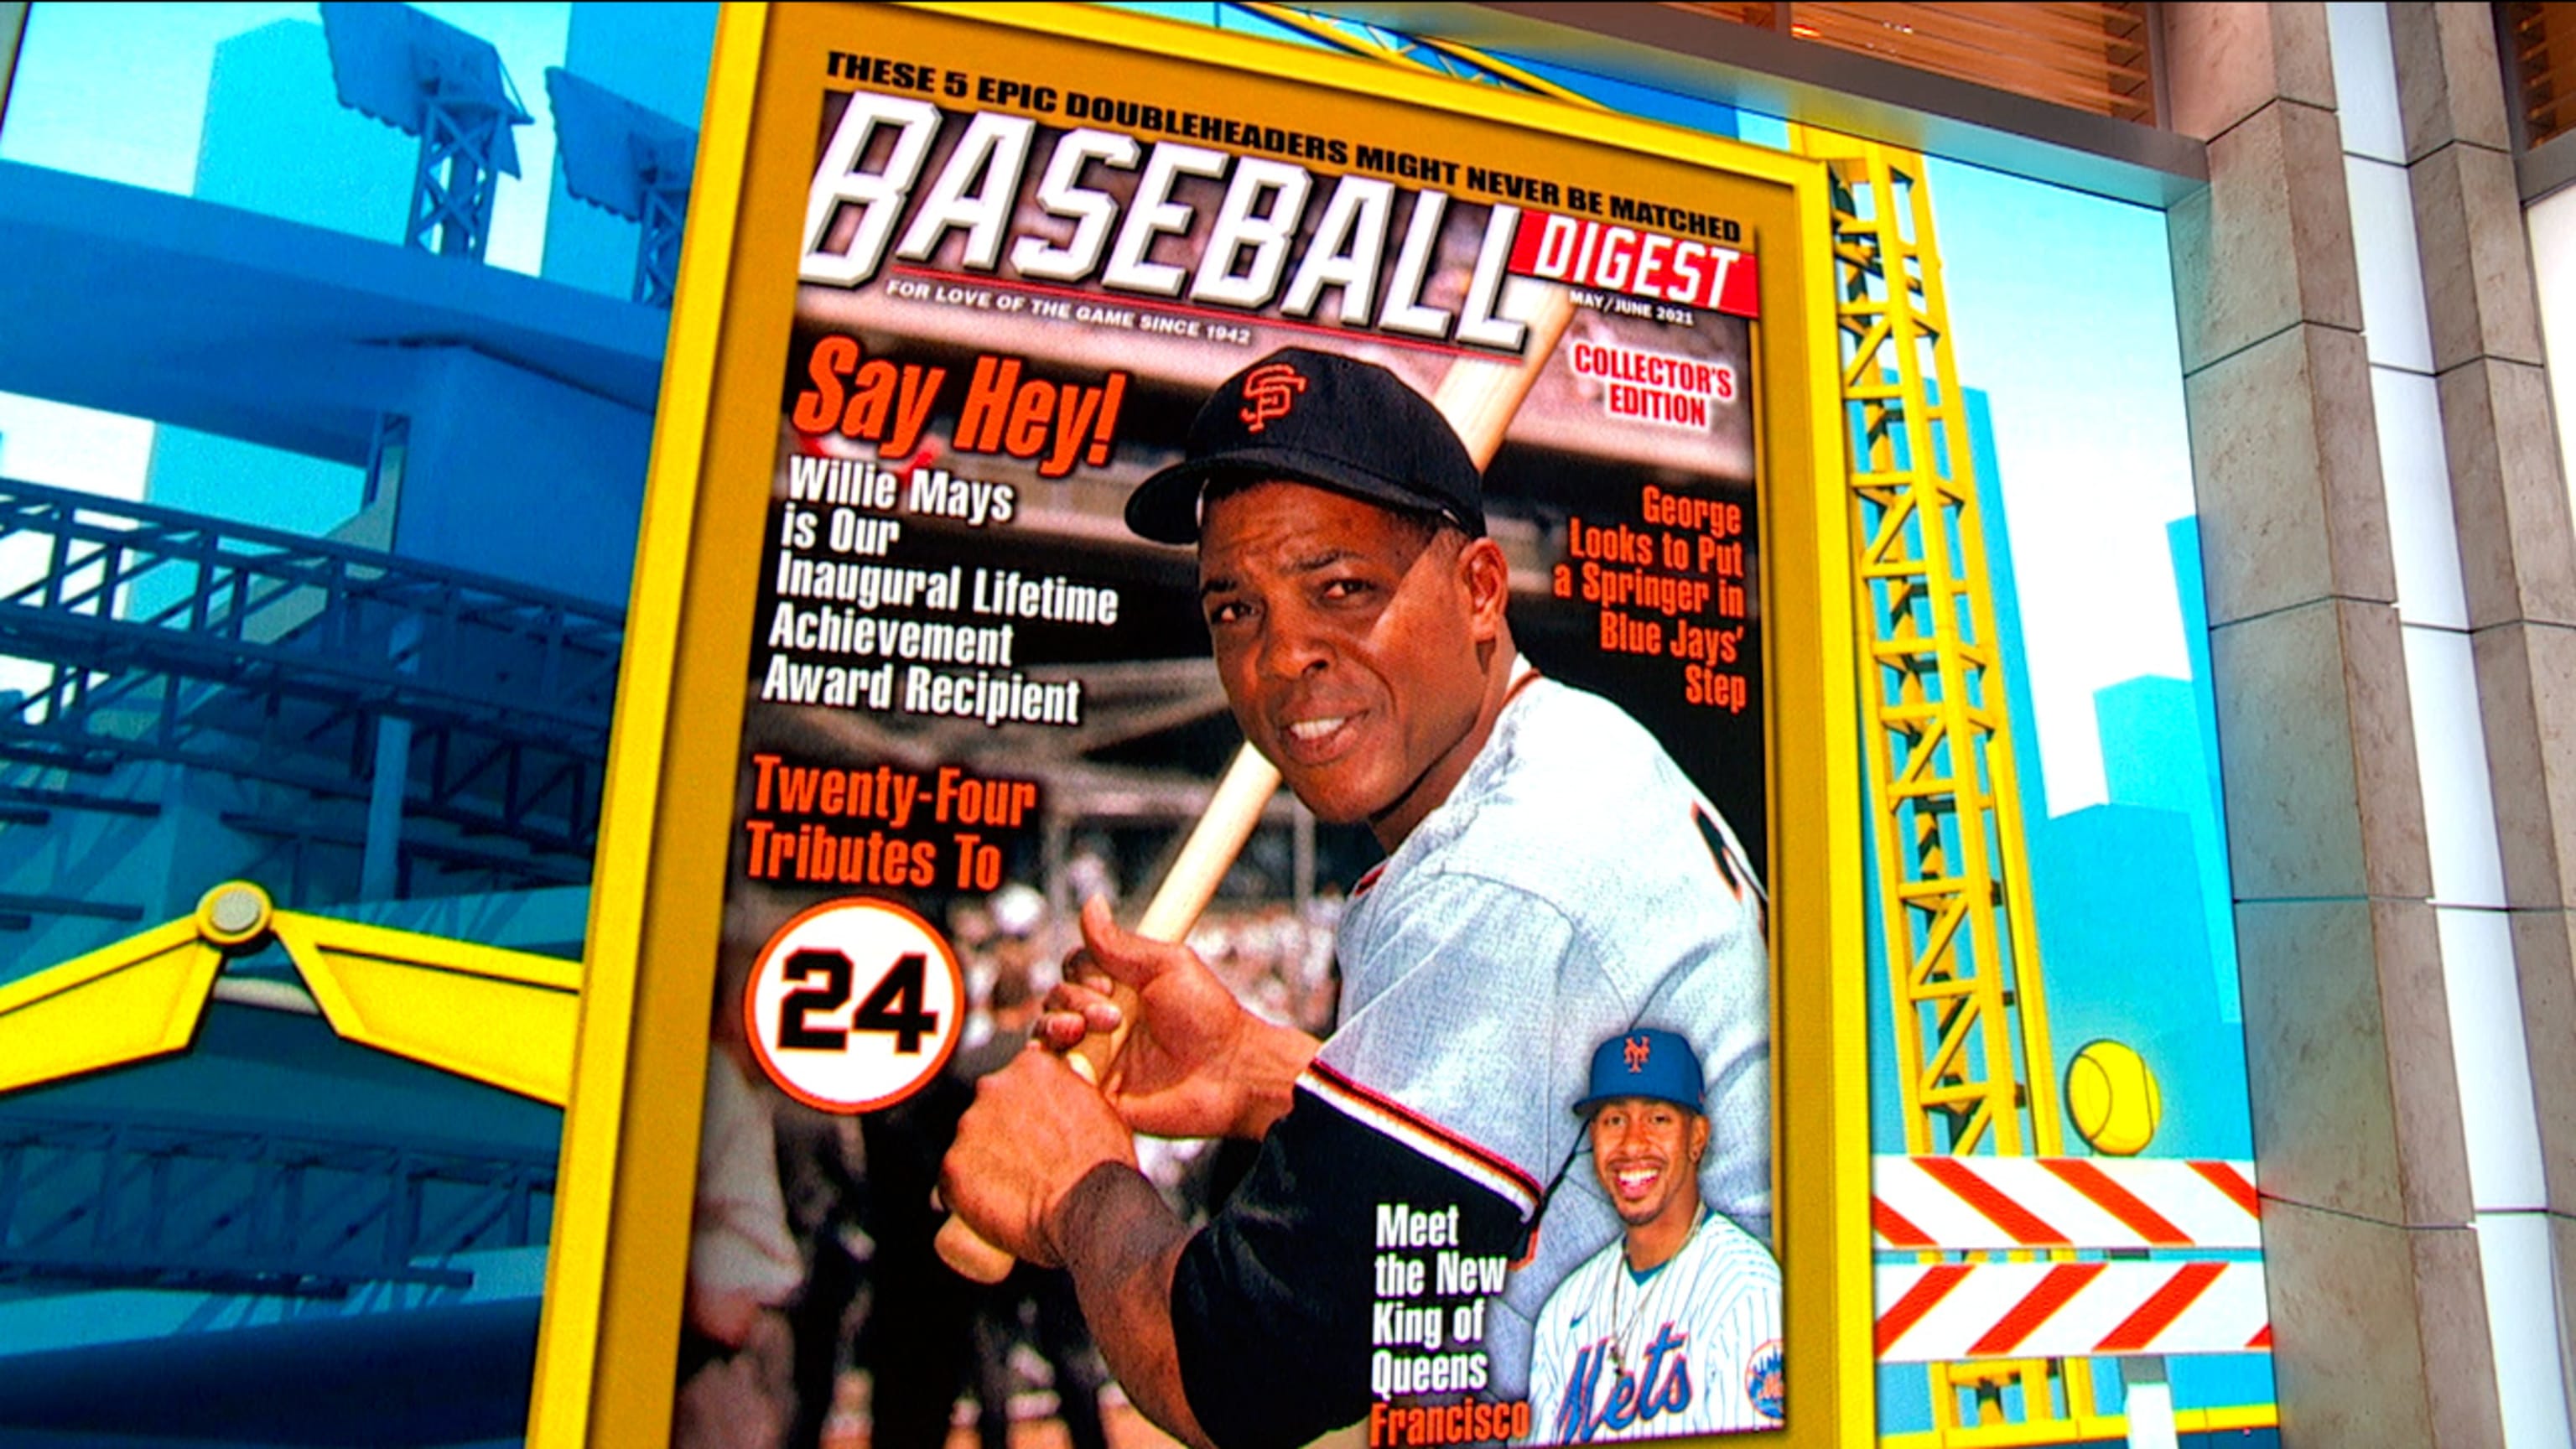 Willie Mays at 90: 24 facts, tidbits, stories and other ways to